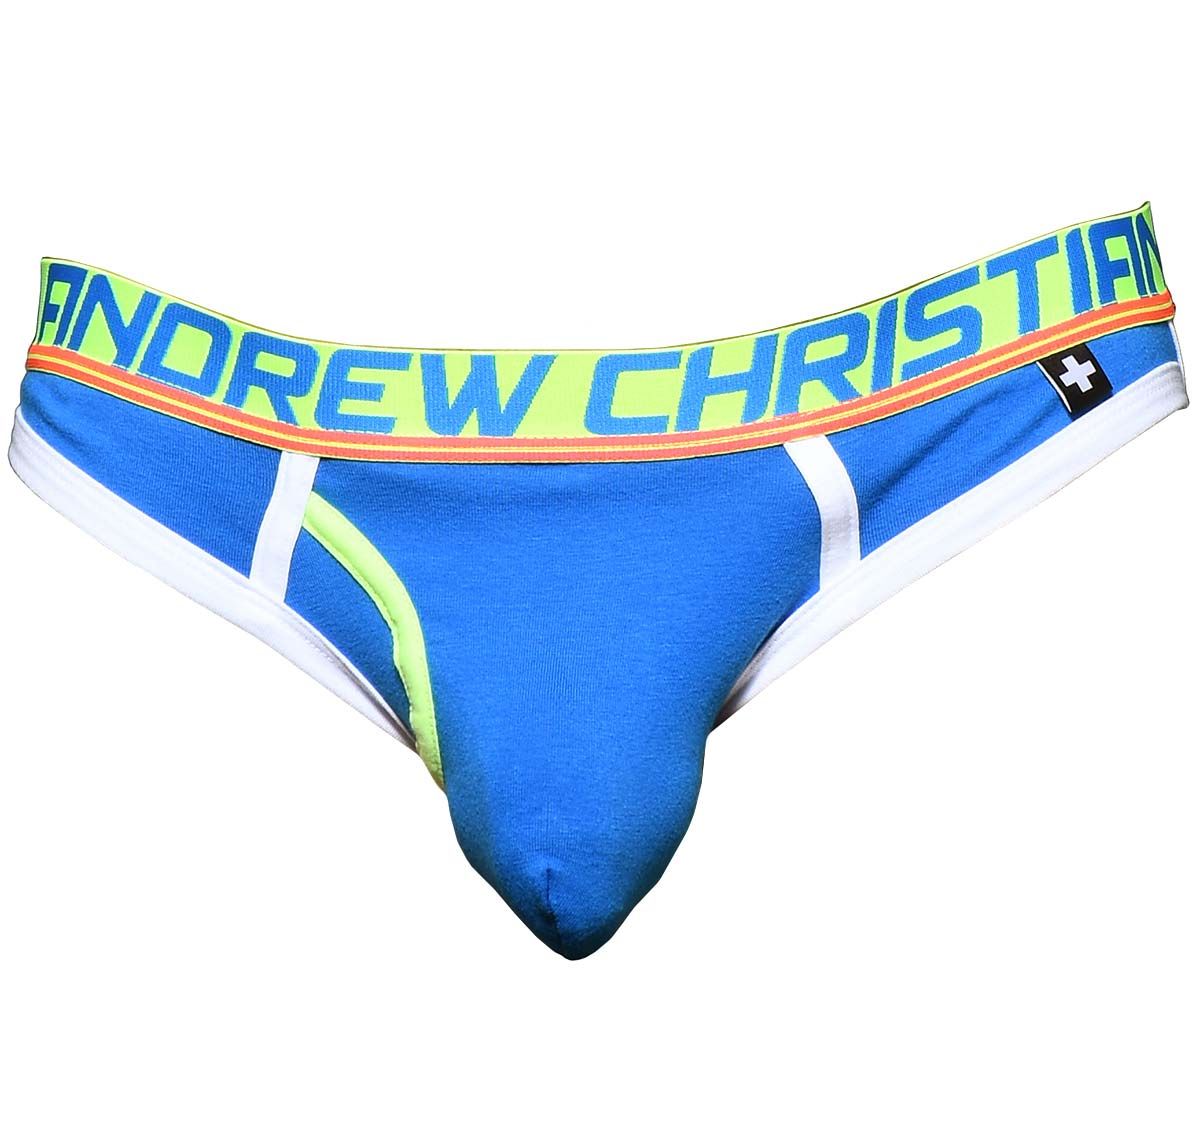 Andrew Christian Suspensorio FLY BRIEF JOCK w/ ALMOST NAKED 91622, azul